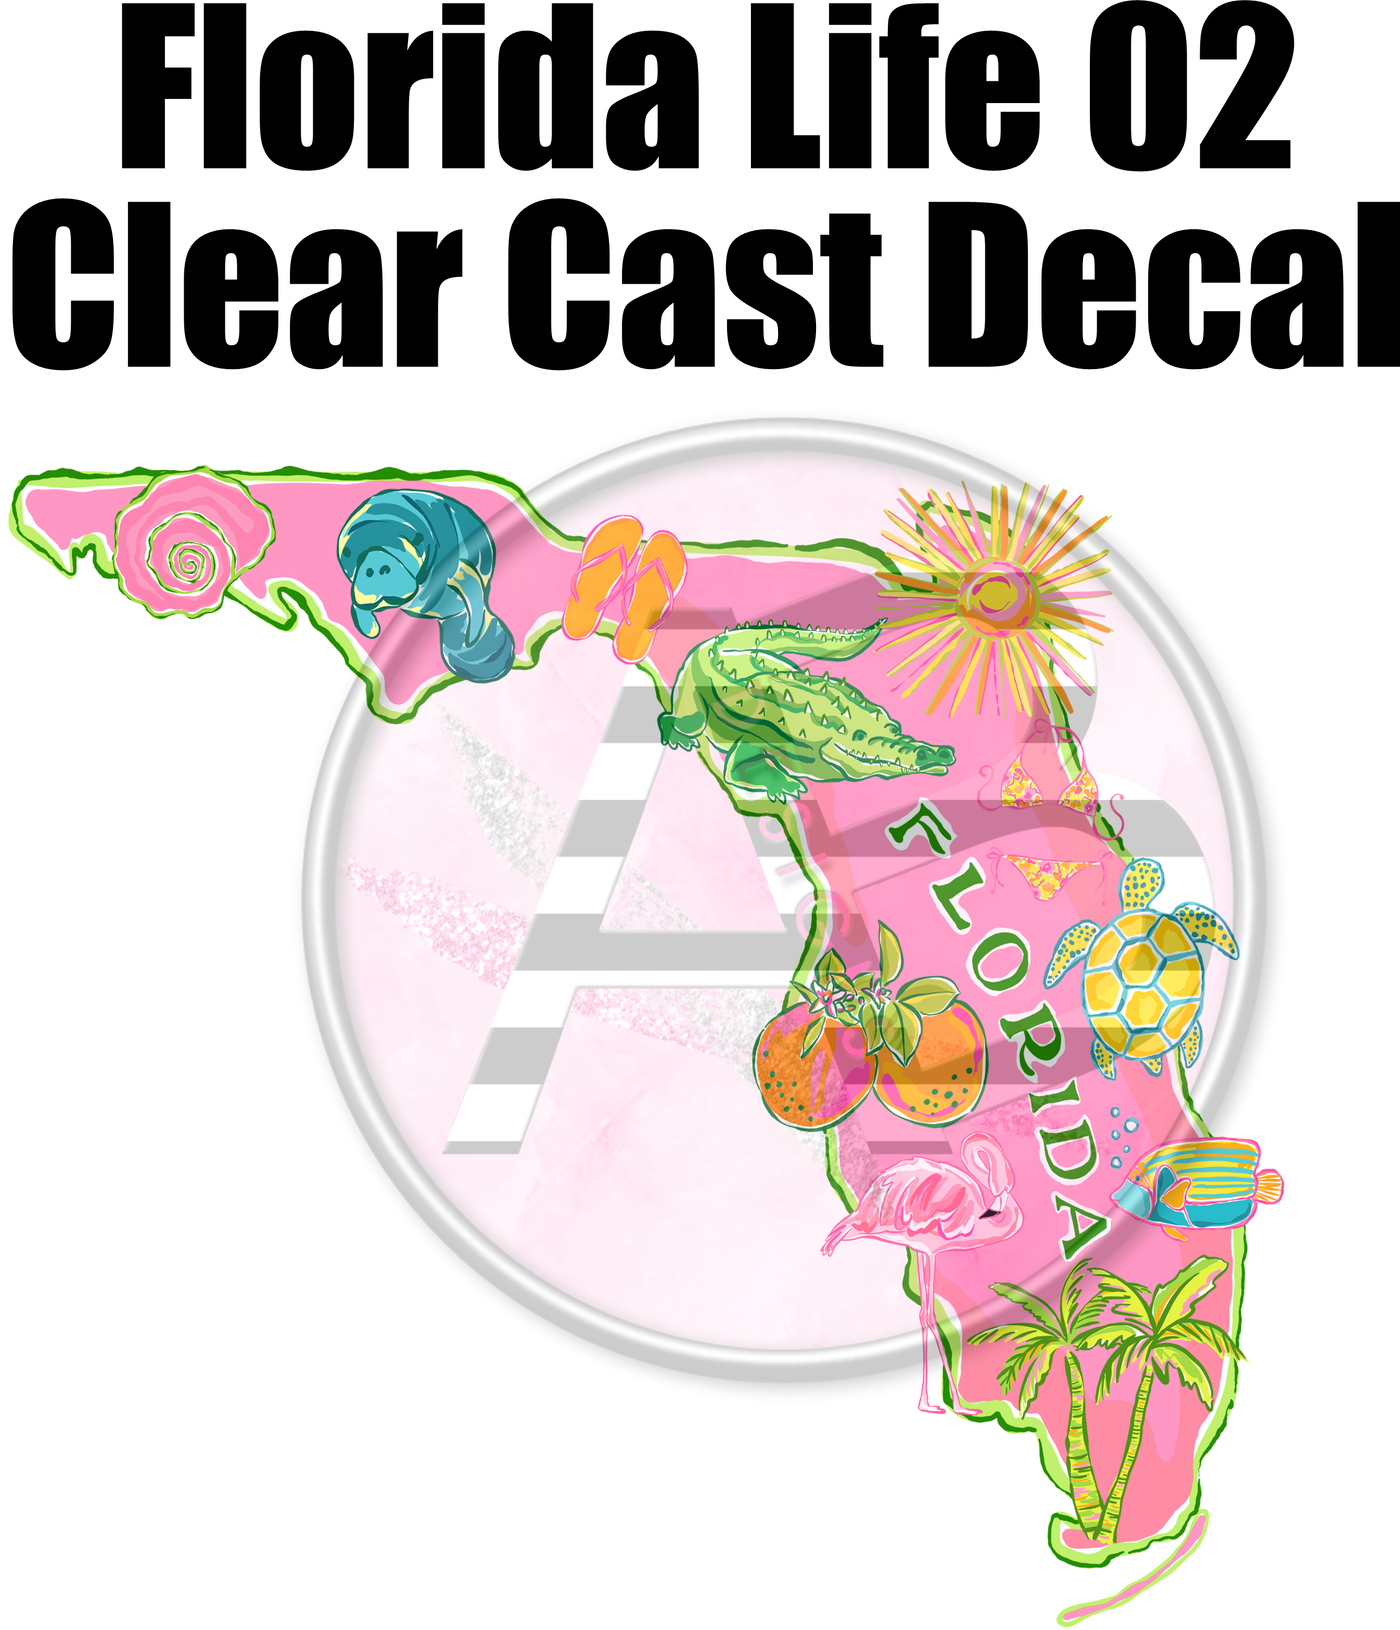 Florida Life 02 - Clear Cast Decal